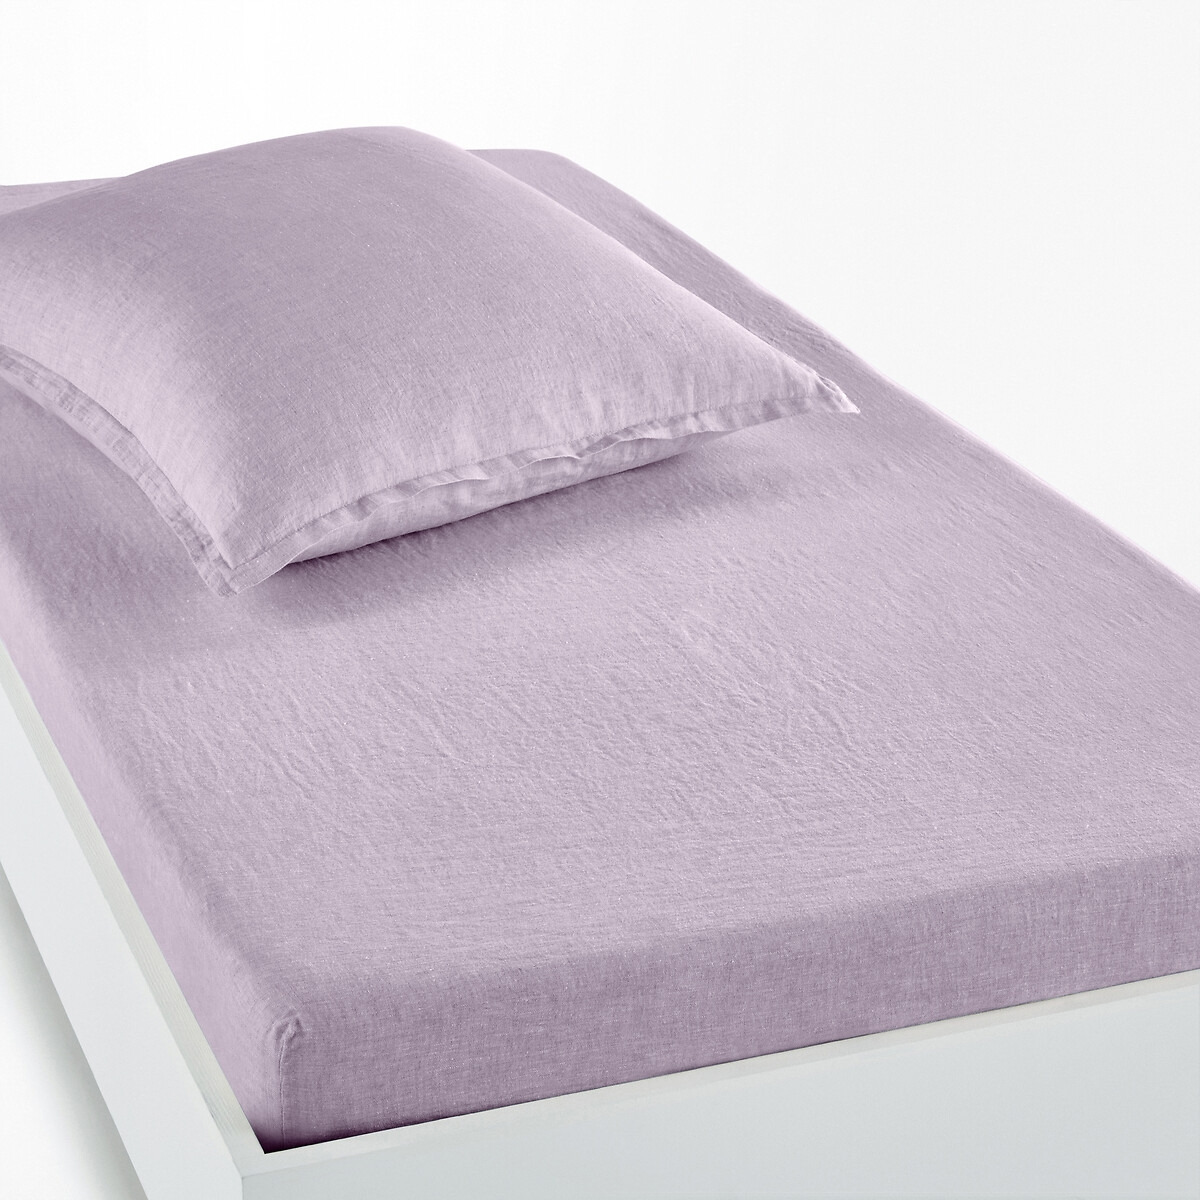 Linot 100% Washed Linen Child's Fitted Sheet - image 1